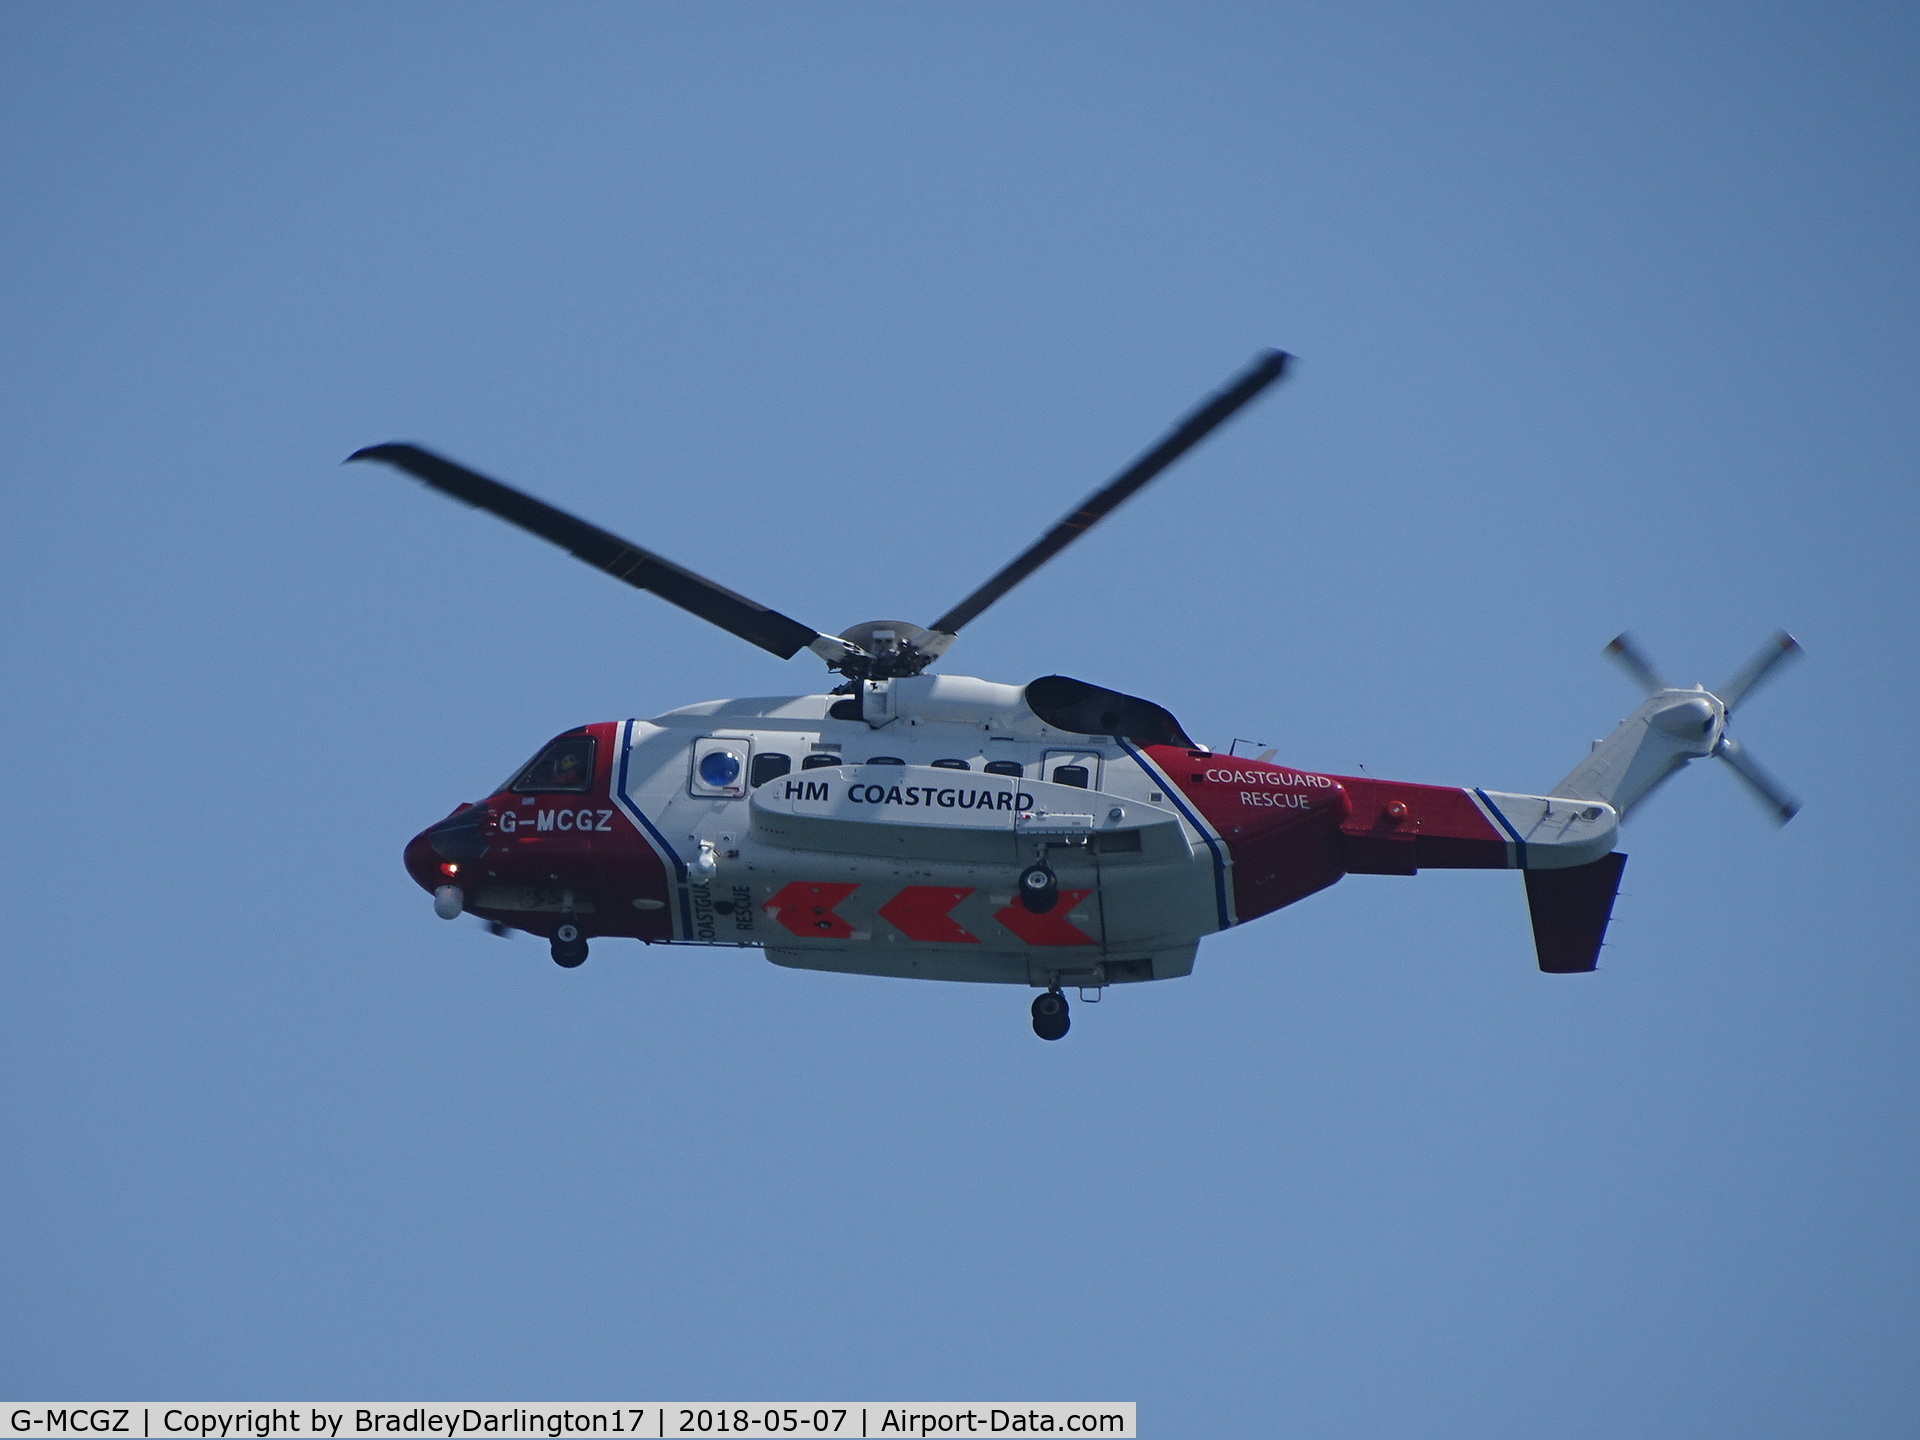 G-MCGZ, 2014 Sikorsky S-92A C/N 920262, Plymouth hoe for a rescue